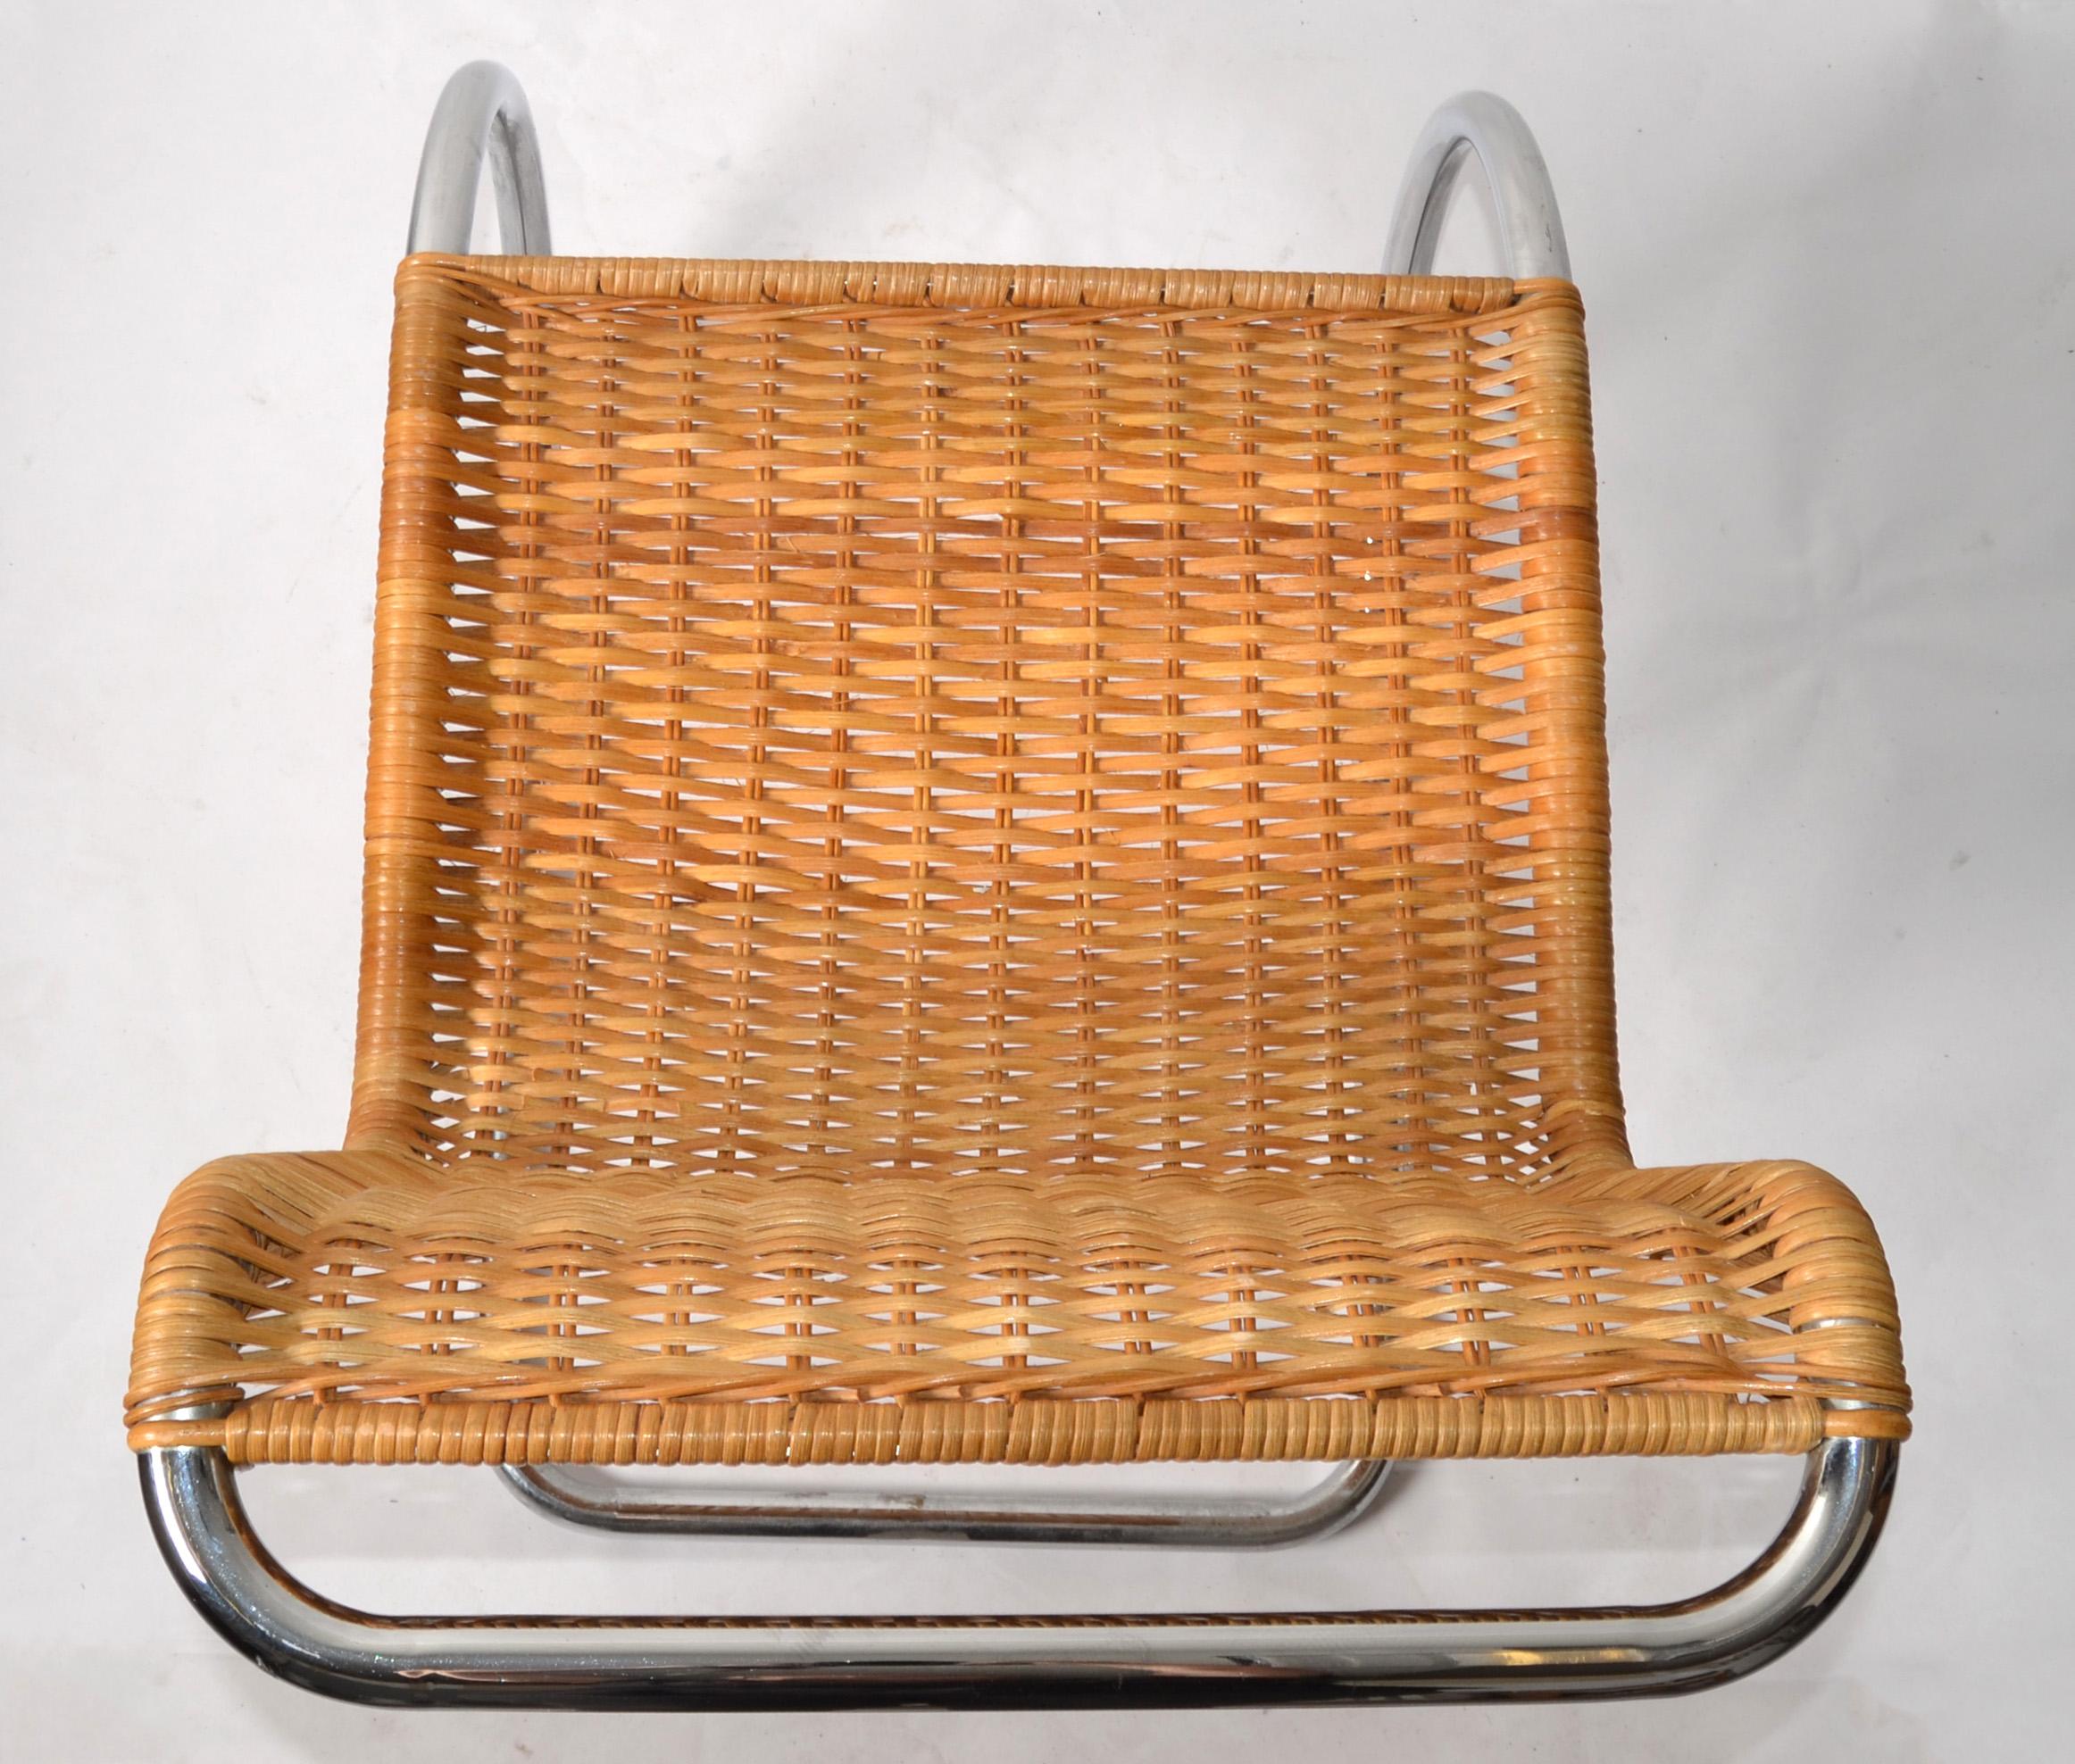 Tubular Ludwig Mies van der Rohe Attributed Mr Chair Armless Woven Cane Seat 70s For Sale 1